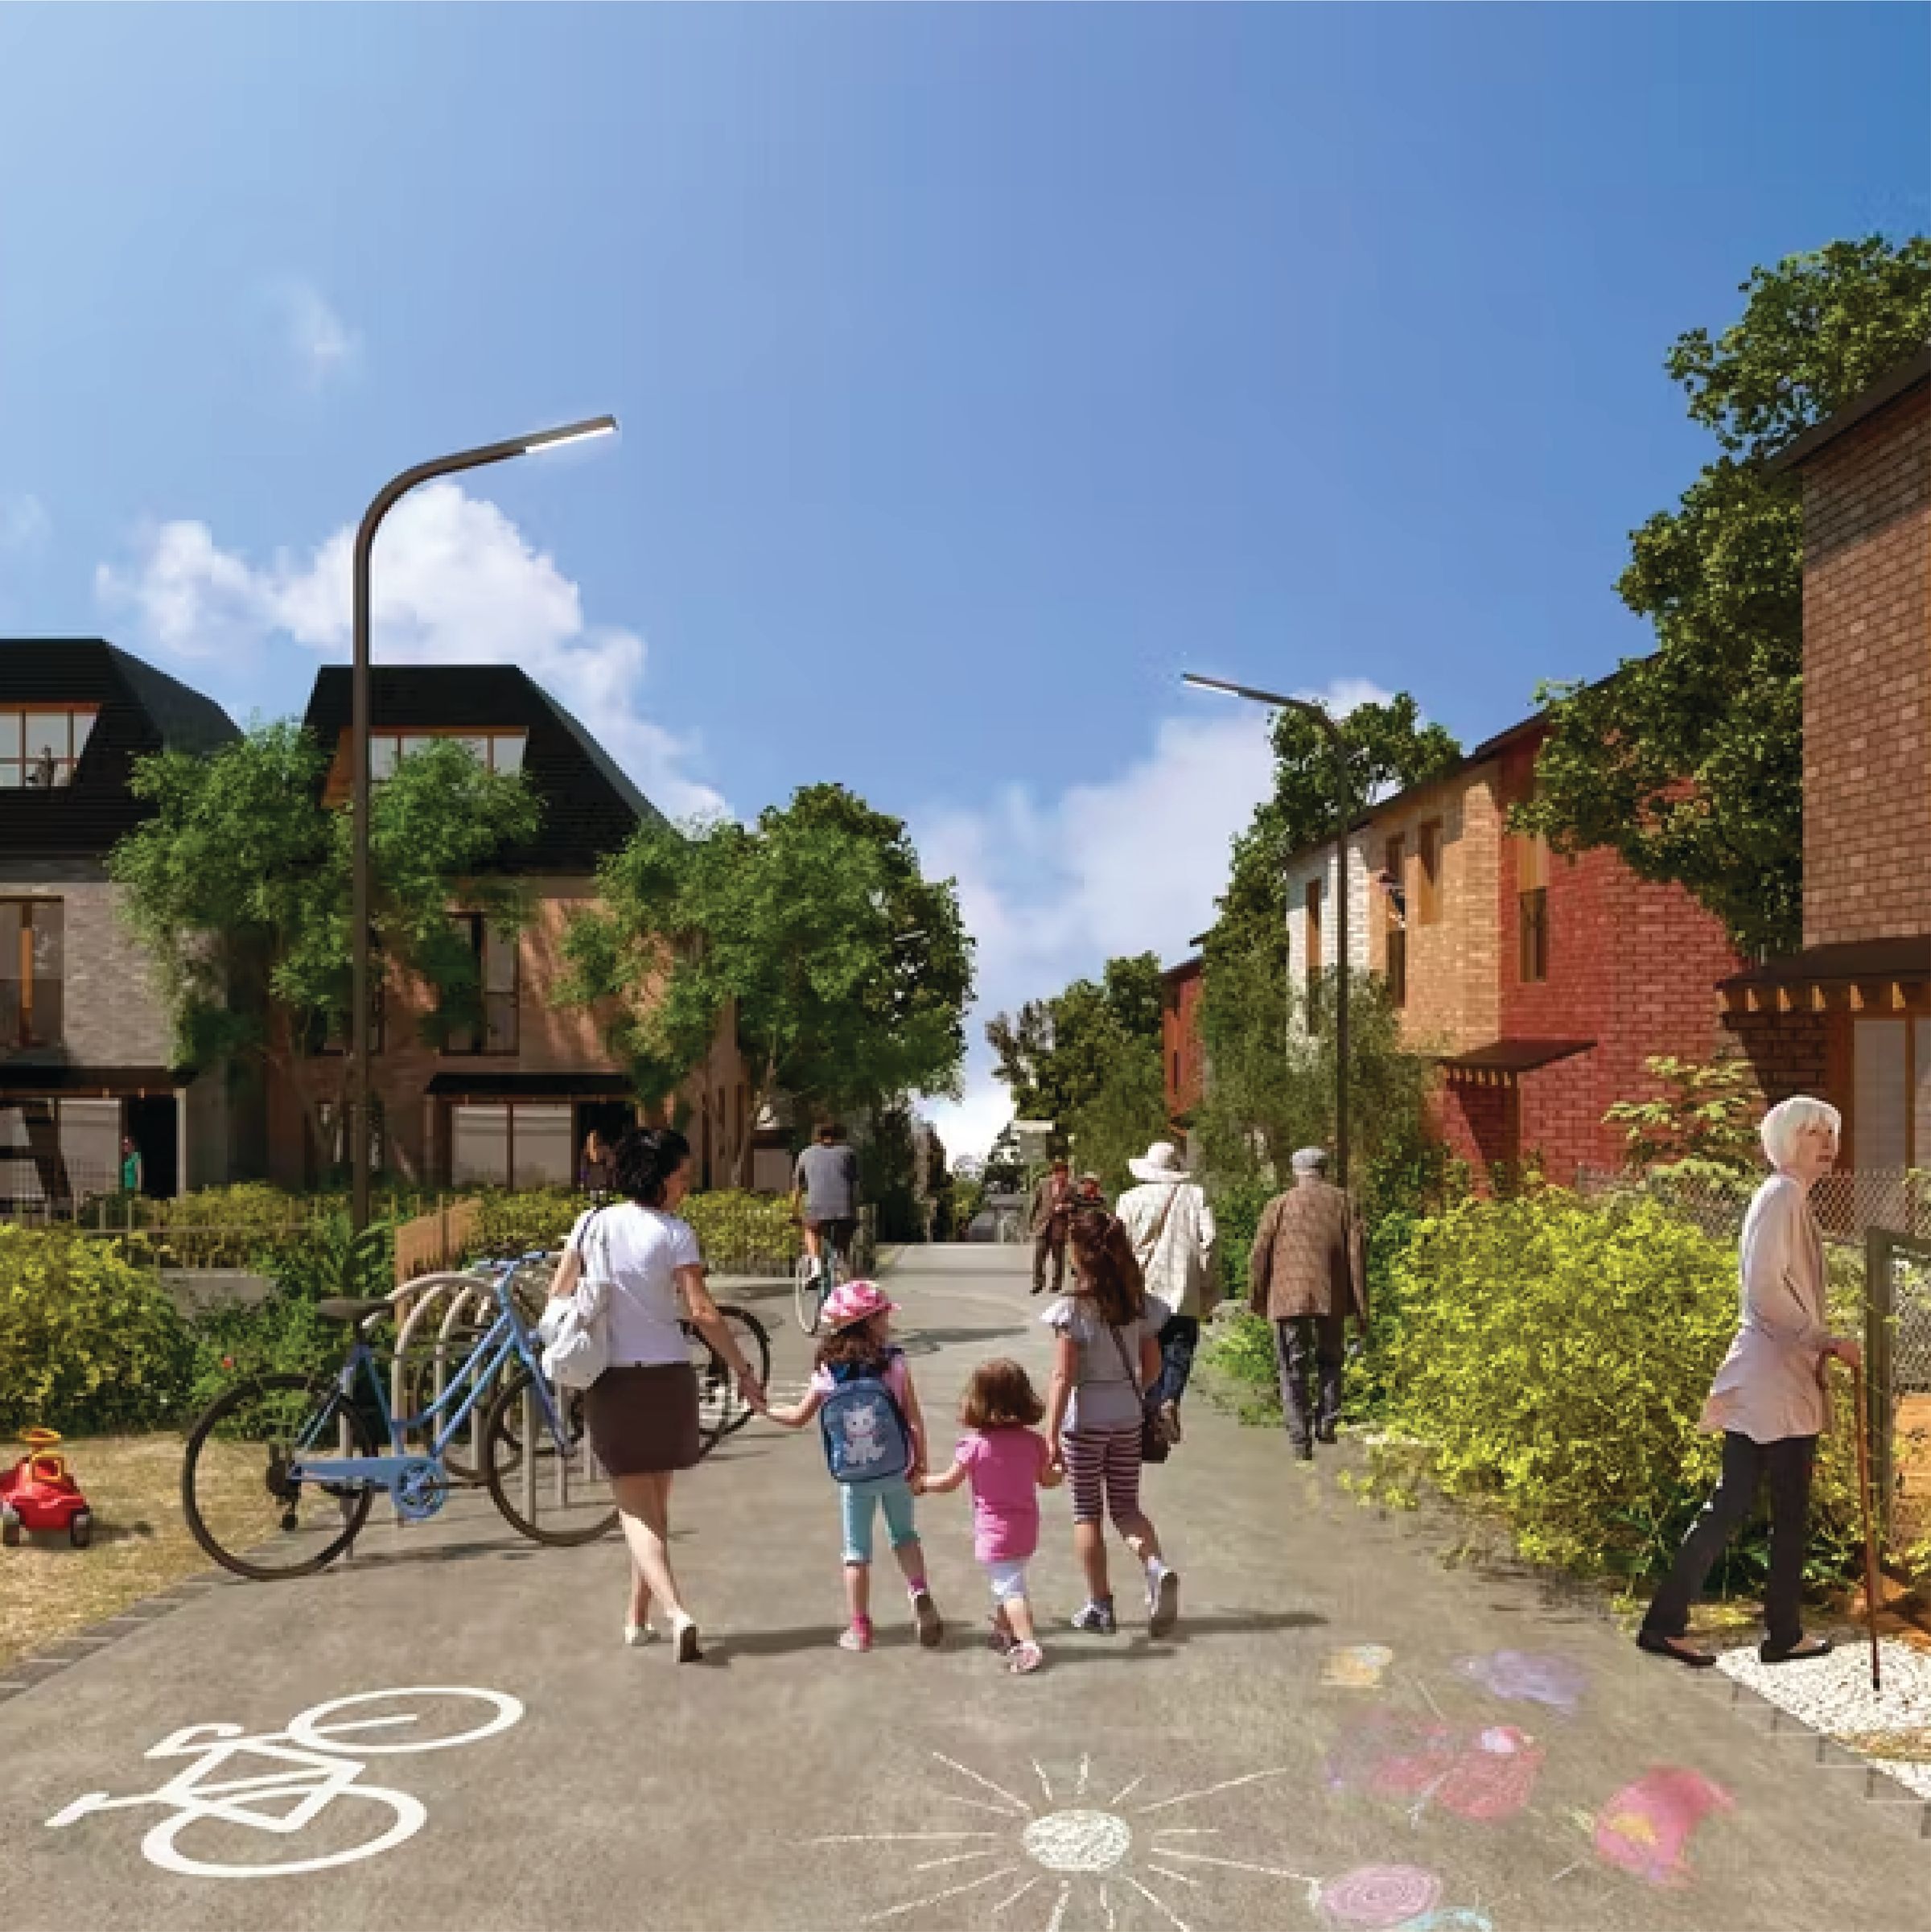 A paved pedestrian and bike-friendly street lined with townhouses and trees and greenery with families and elderly people walking